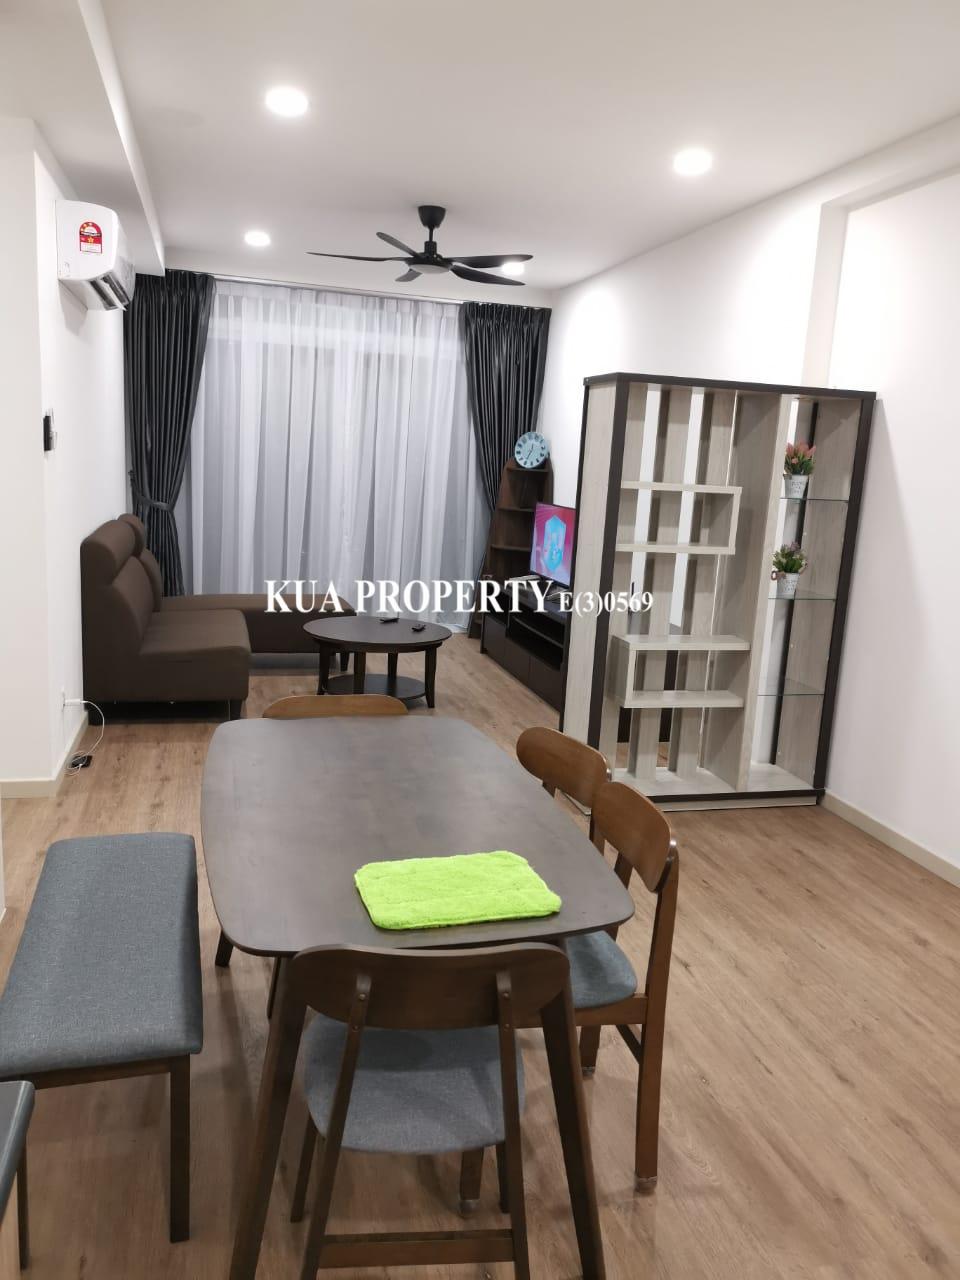 Avona residence For Rent! Located at Tabuan Tranquility, Northbank